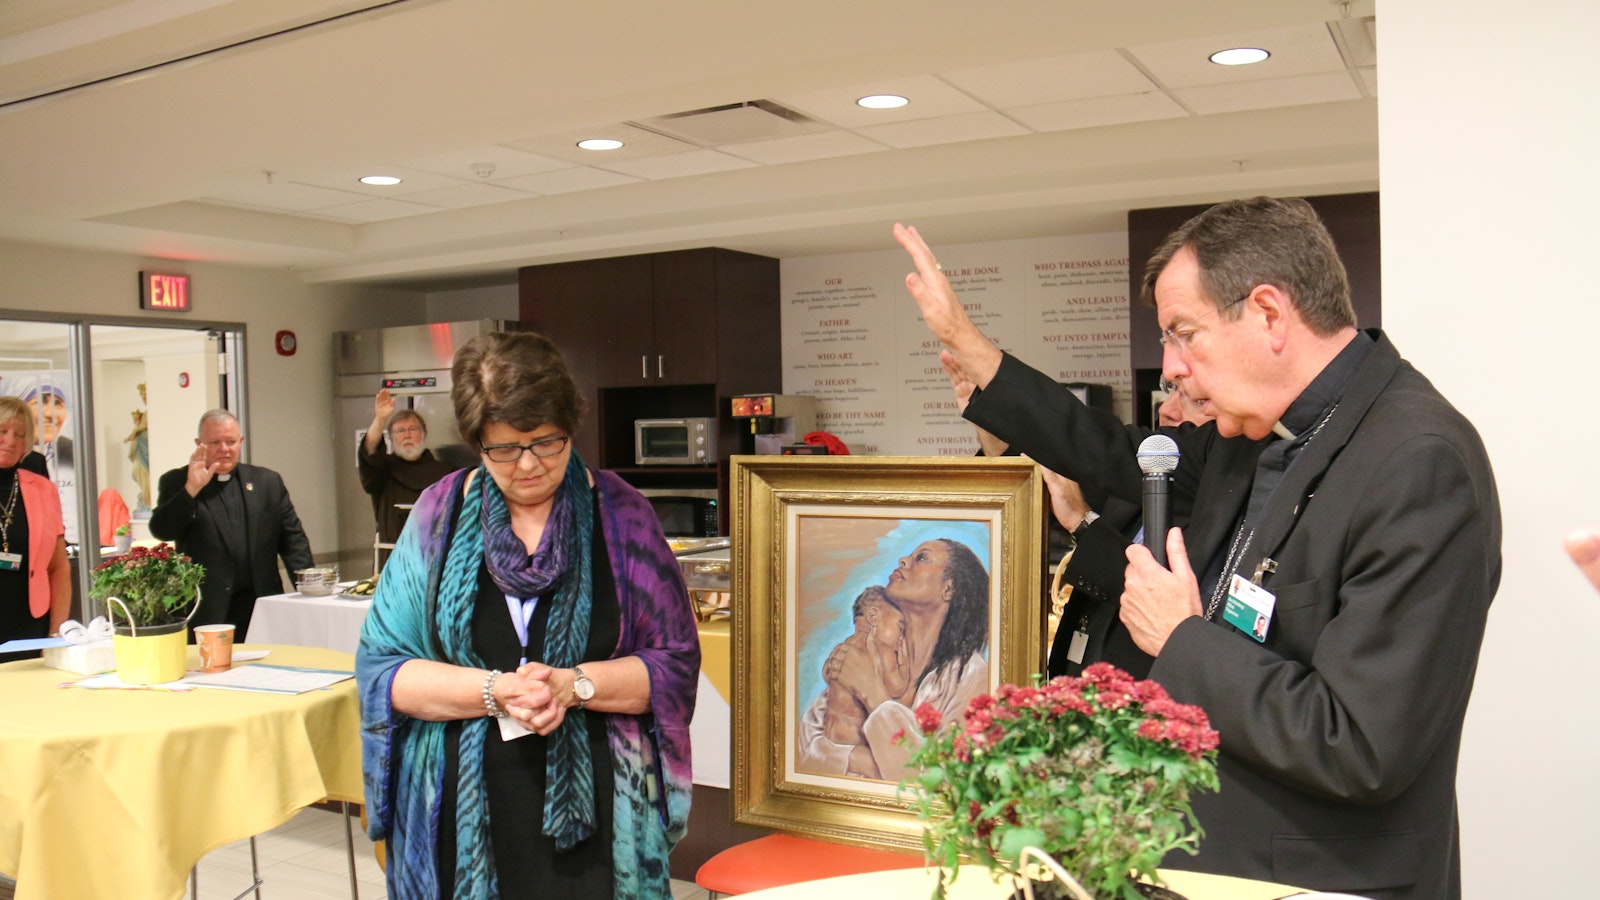 Archbishop Vigneron prays over Pam Beech, human resources director for the Archdiocese of Detroit, during Beech's retirement celebration on Sept. 15, 2016. (Jonathan Francis | Detroit Catholic file photo)